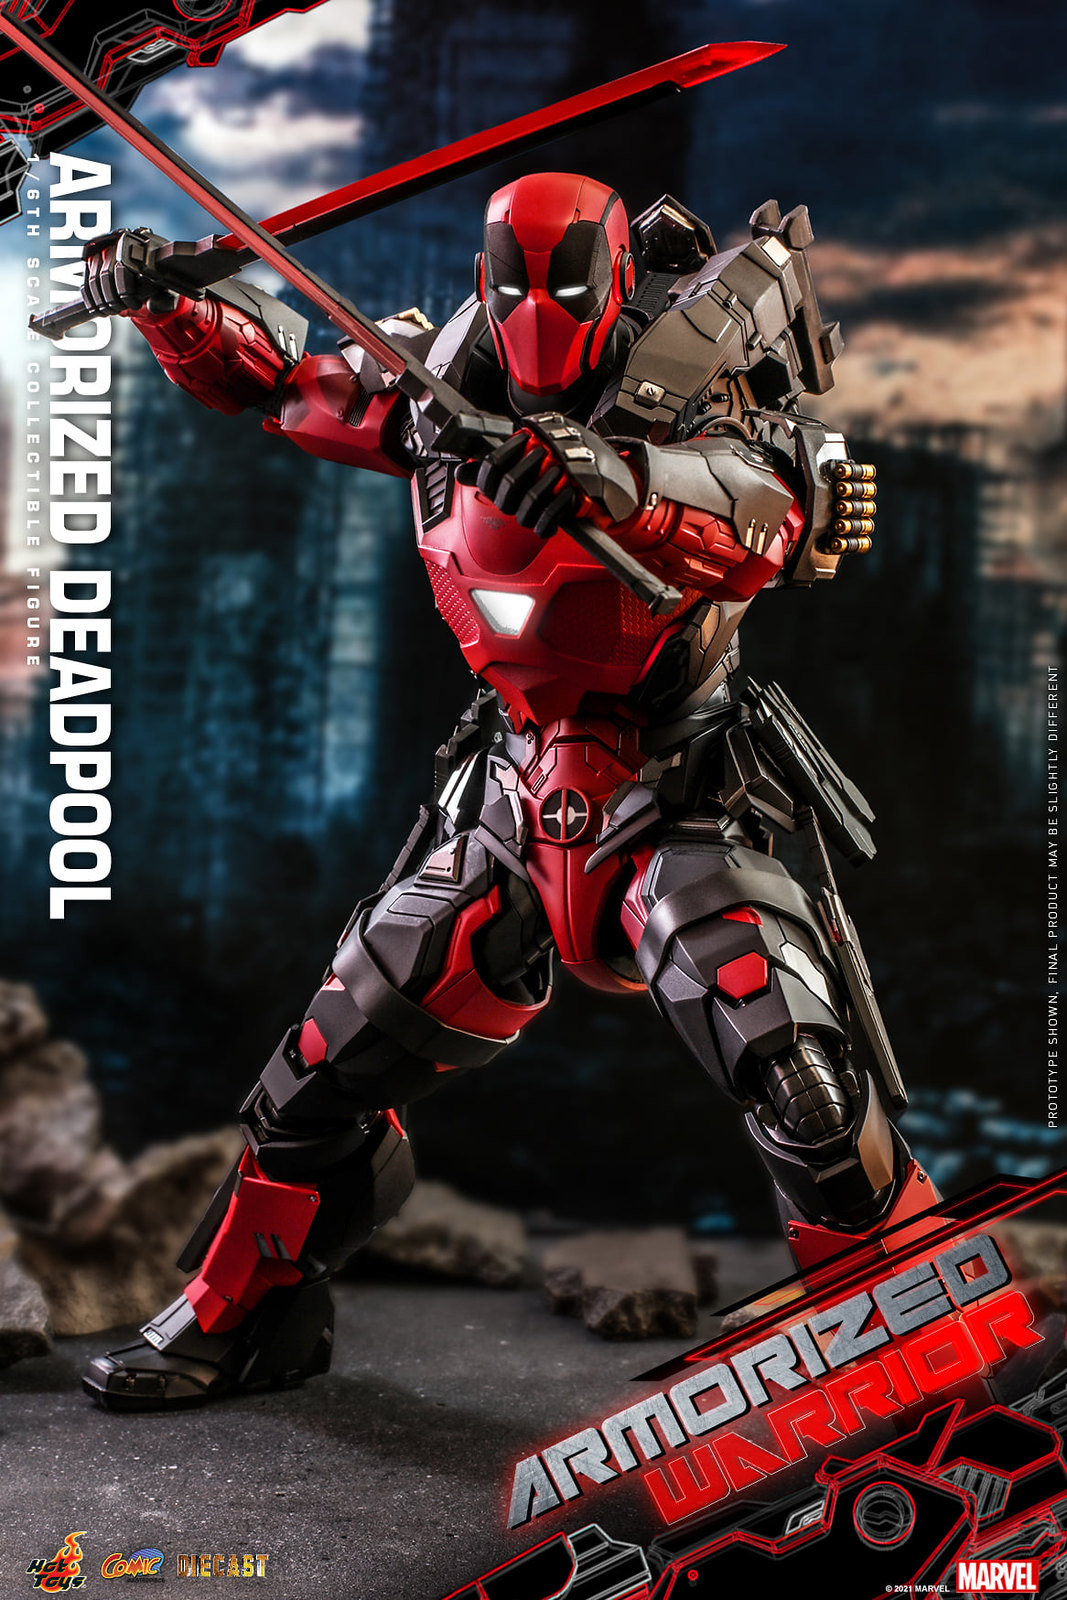 NEW PRODUCT: Hot Toys Armorized Warrior - 1/6th scale Armorized Deadpool Collectible Figure [Armorized Warrior Collection] 51311442503_12c304bc9d_h